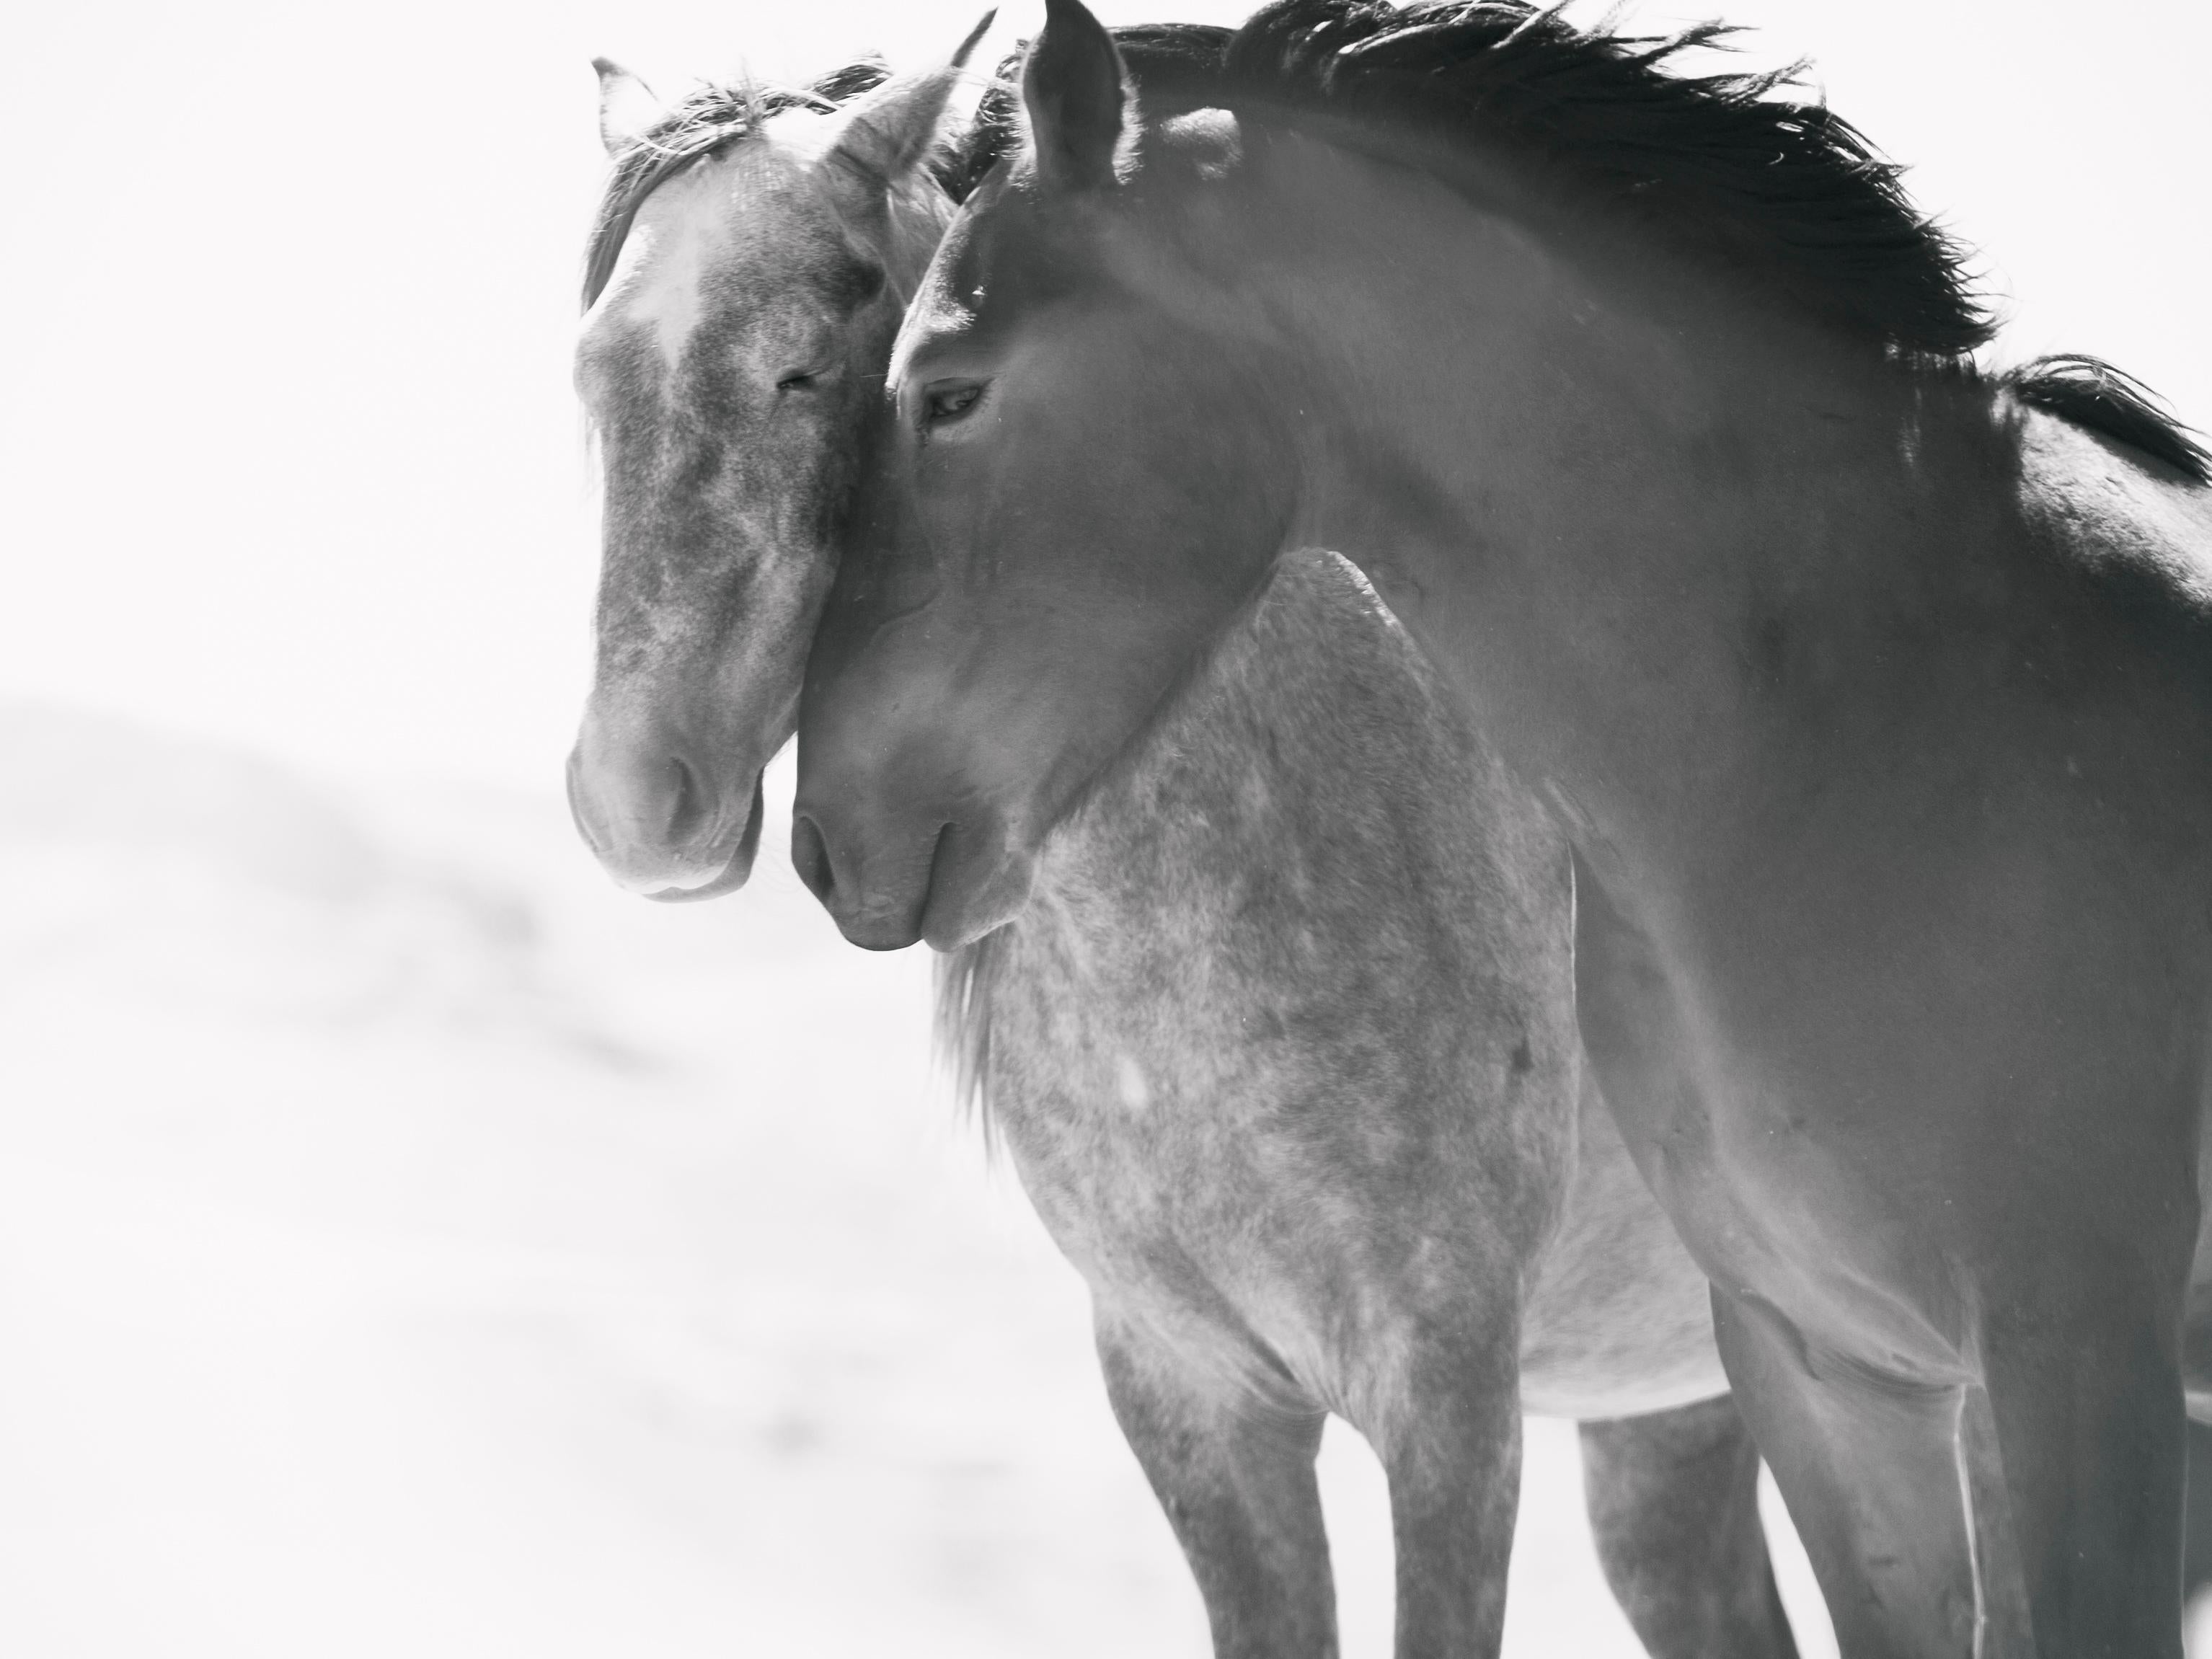 Shane Russeck Animal Print - "Soulmates"  40x60 Photography of Wild Horses Mustangs by Unsigned Test Print